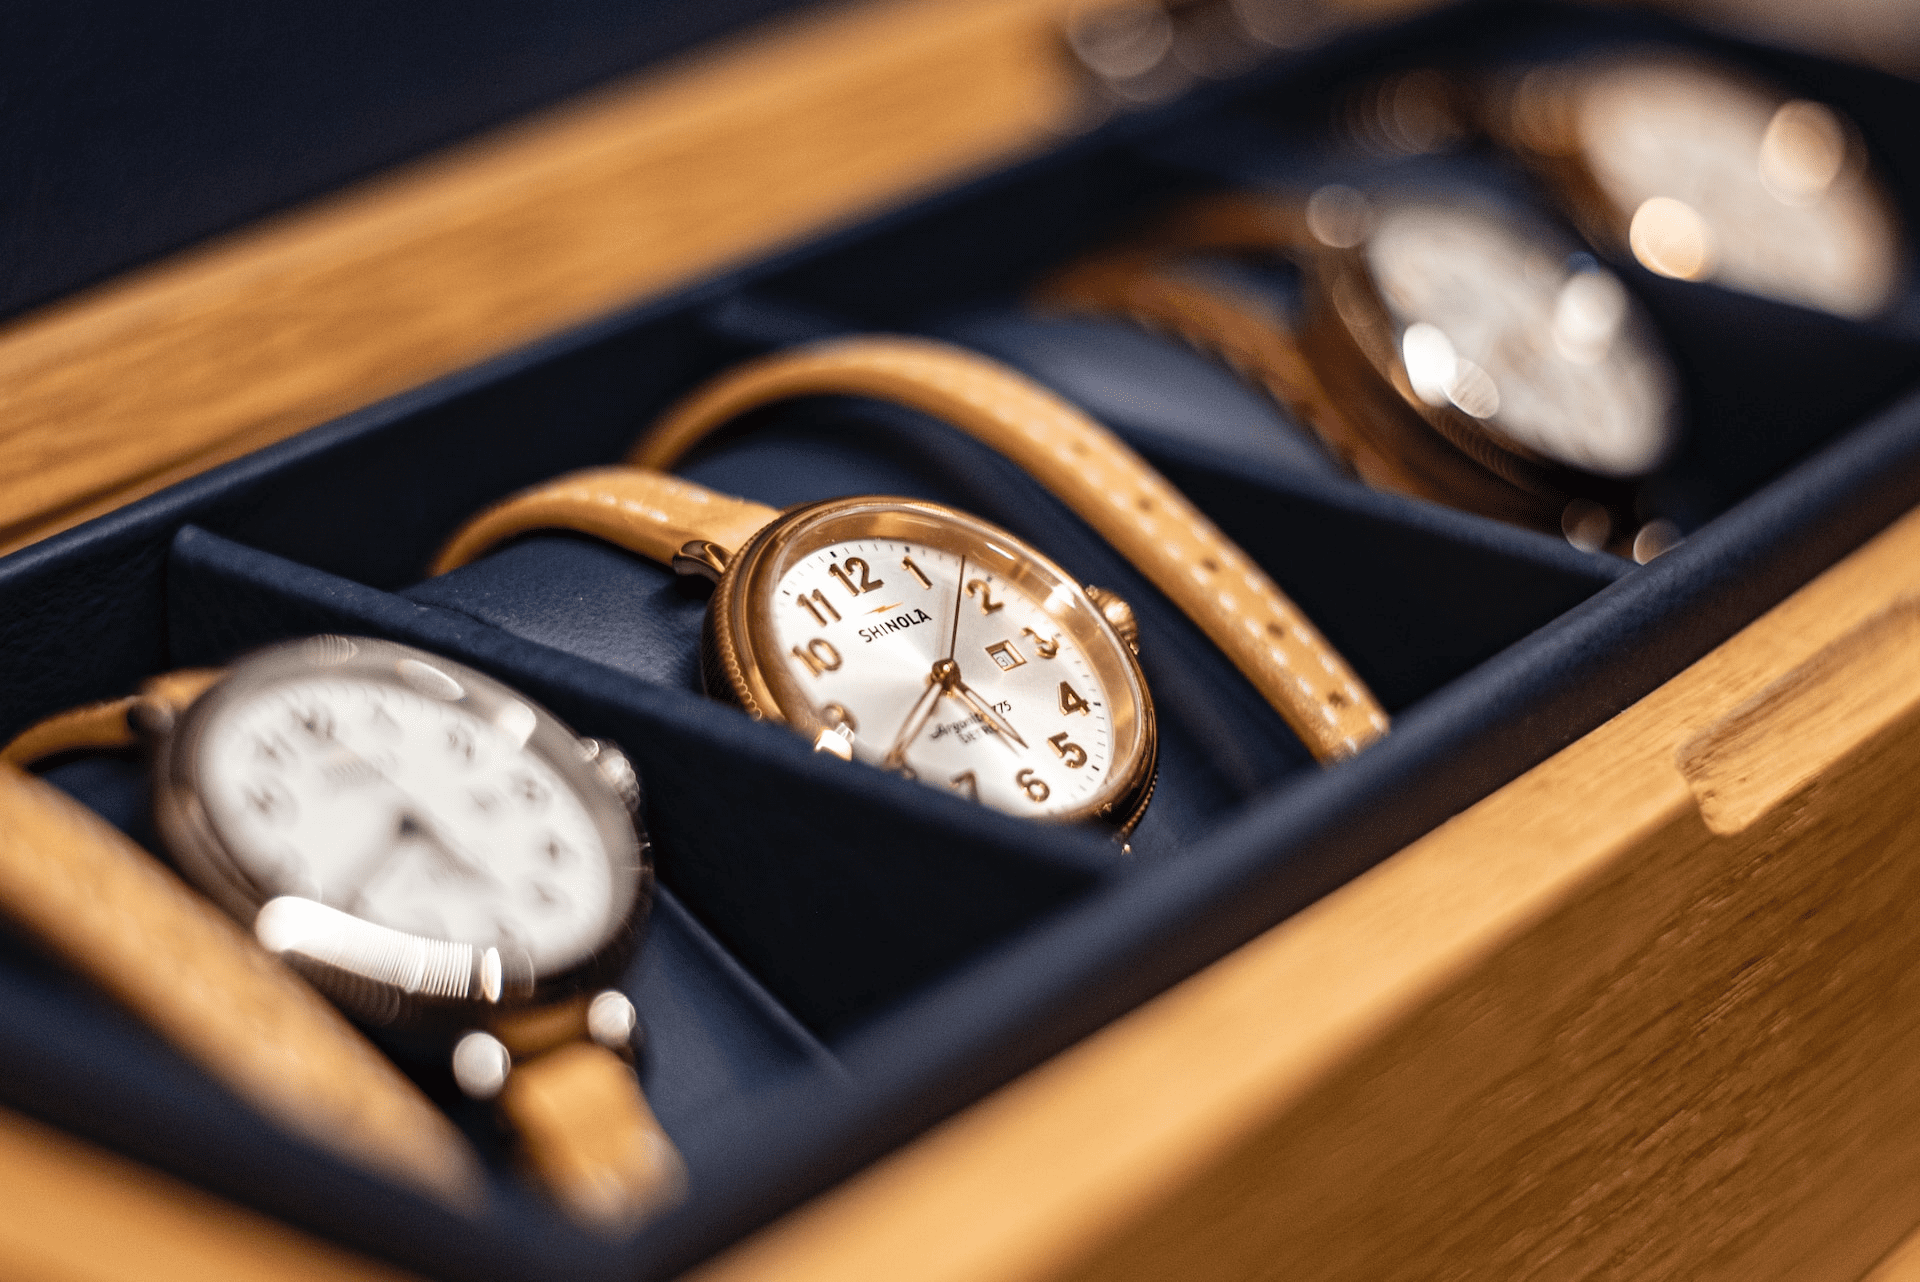 Shinola watches in a case waiting to be worn